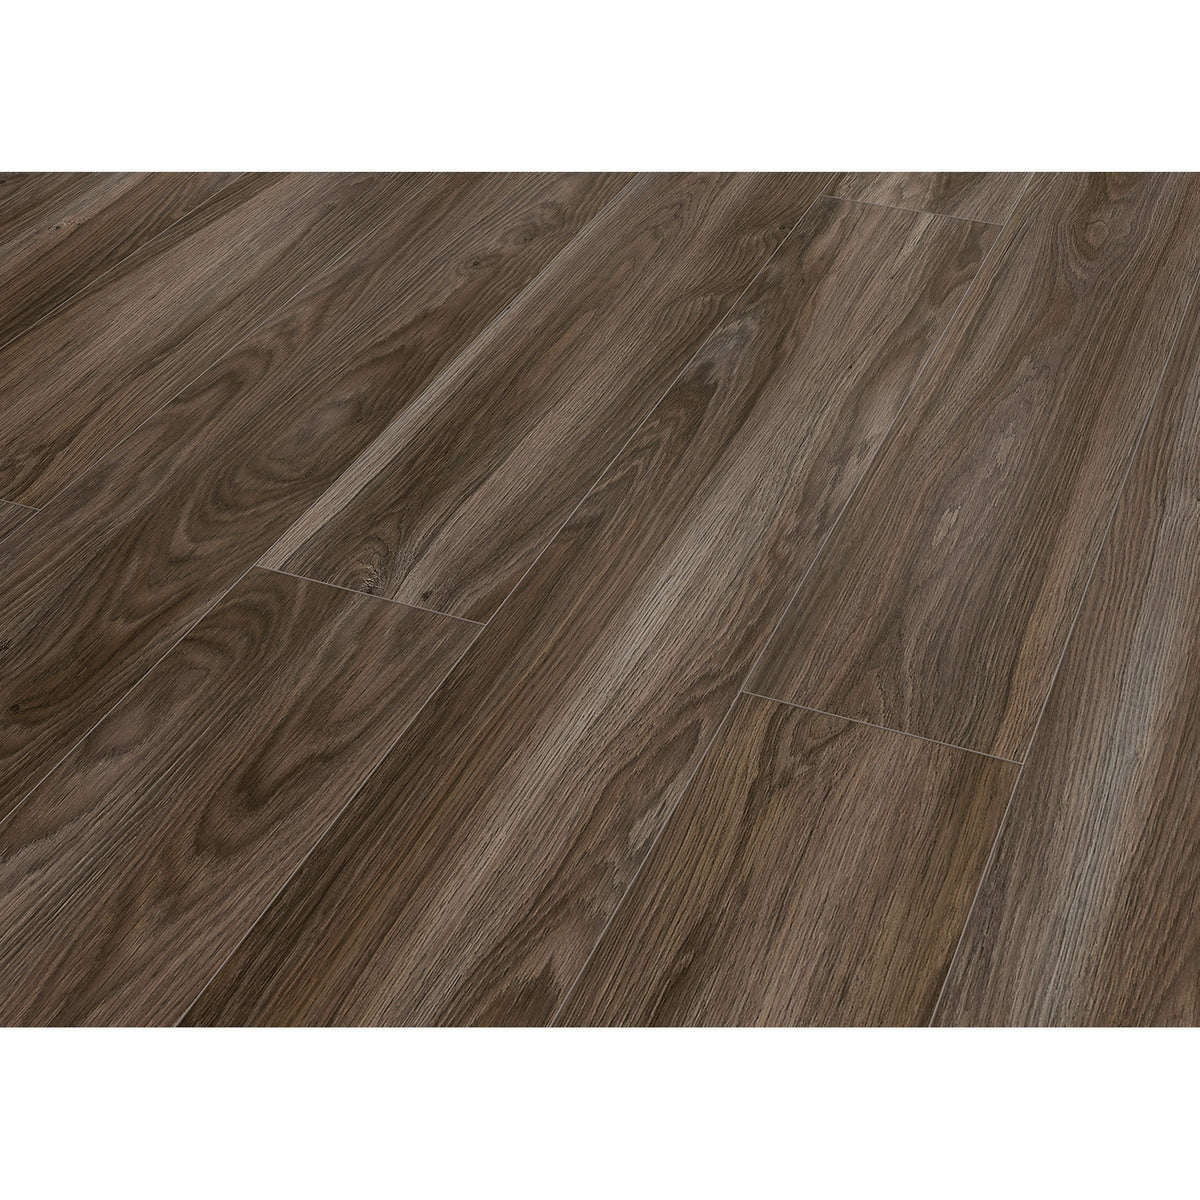 Inhaus - Solido Visions Collection - Gunstock Oak Close View